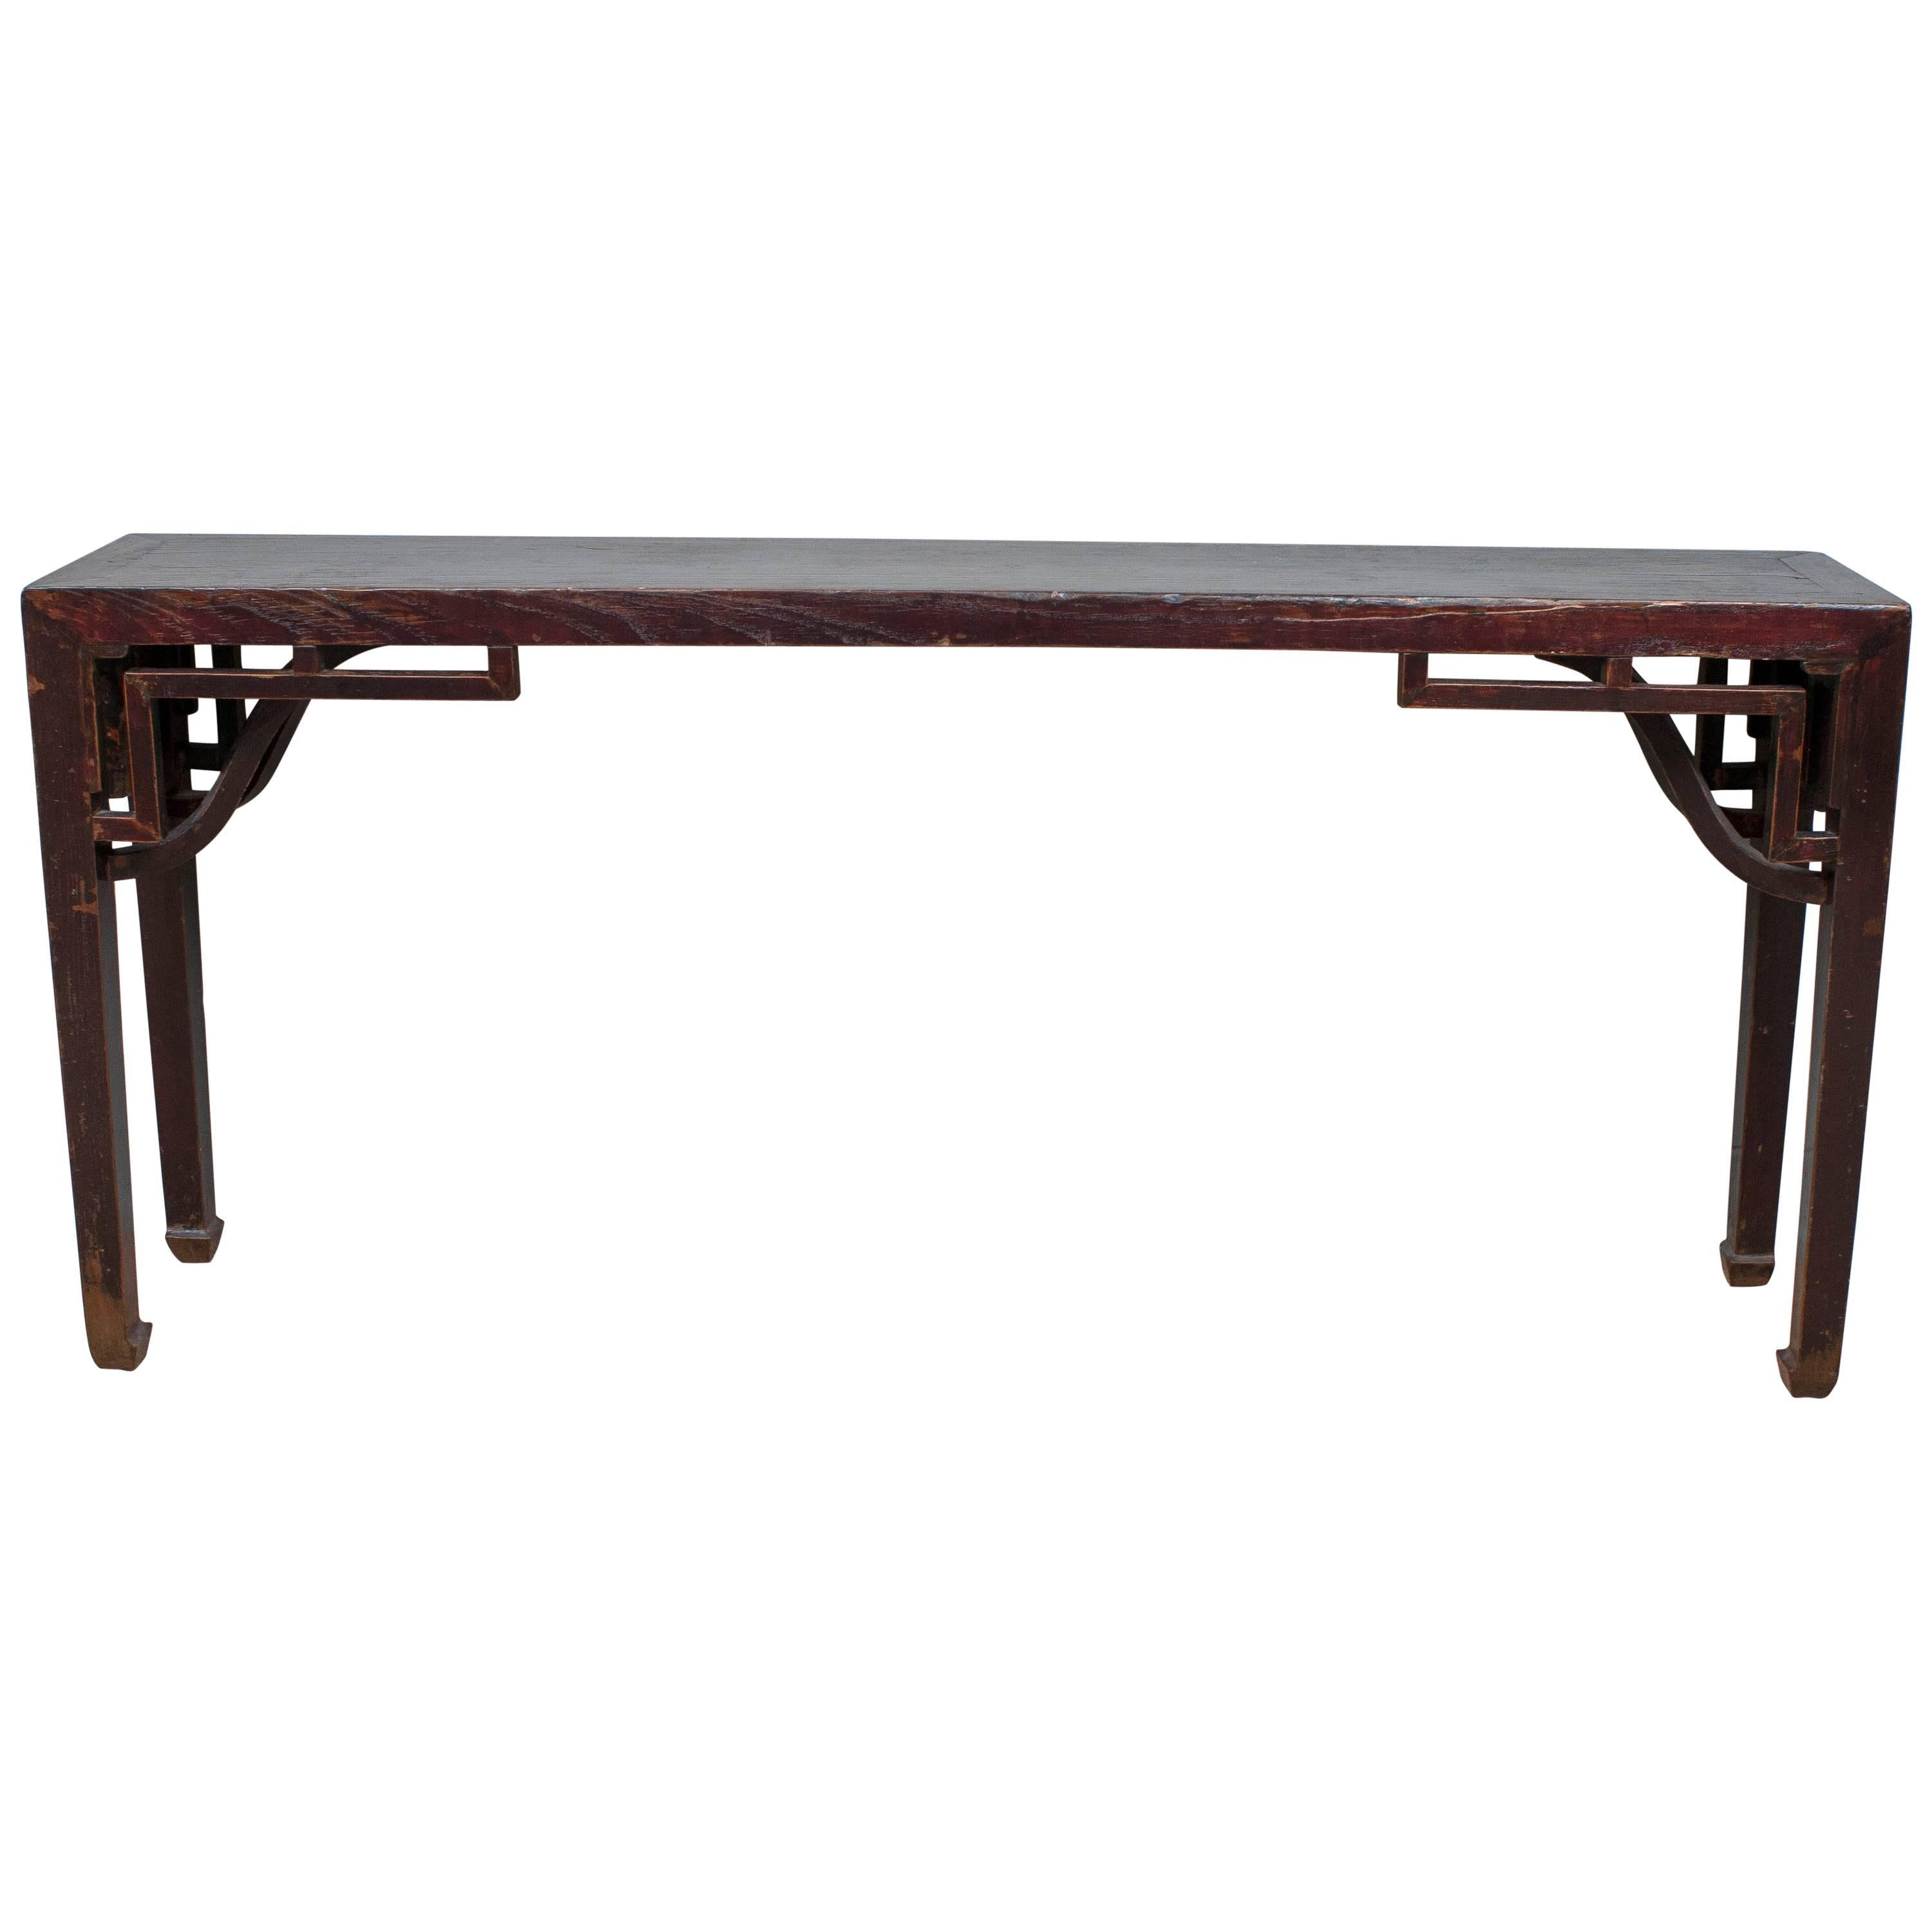 Qing Dynasty Chinese Altar Table For Sale